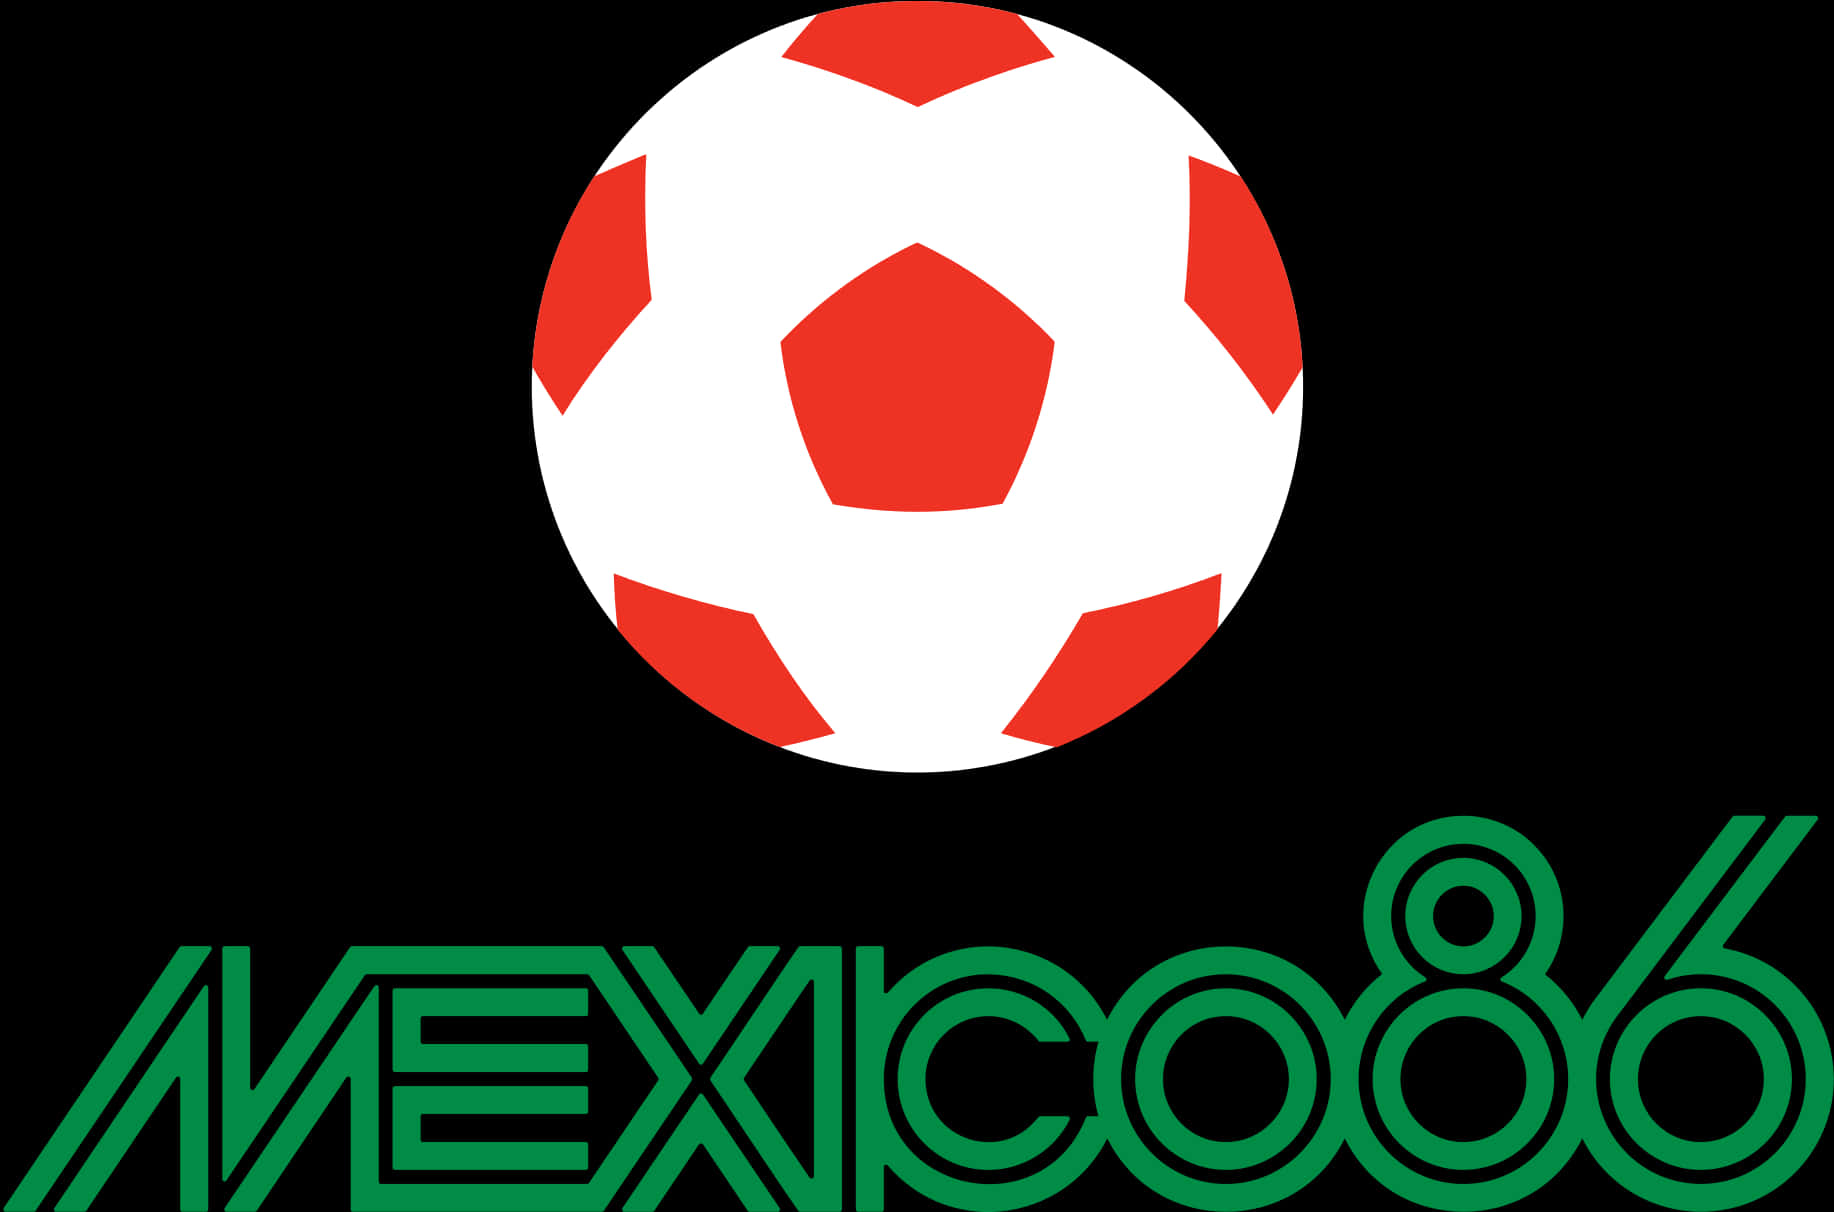 Iraq's World Cup Campaign, Where Luck Met Fate - Fifa World Cup 1986 Logo